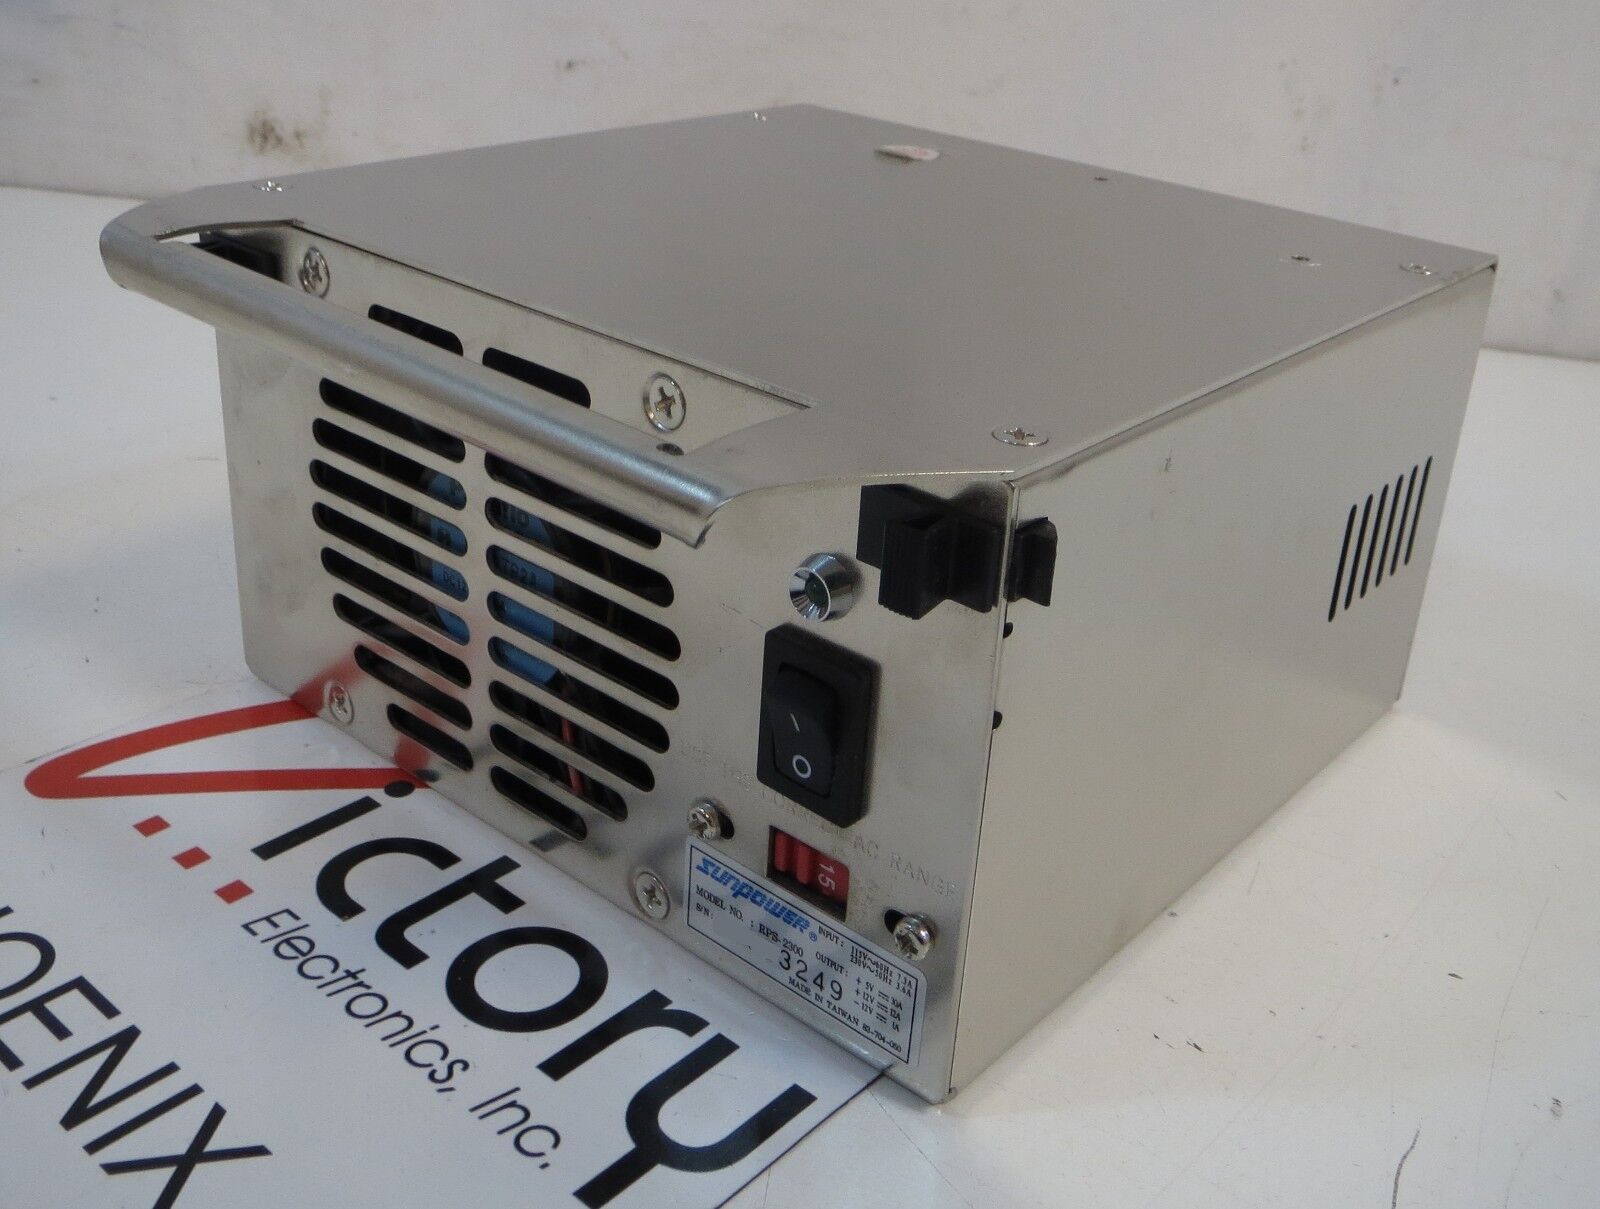 Used Sunpower Redundant Replacement Power Supply, Model: RPS-2300